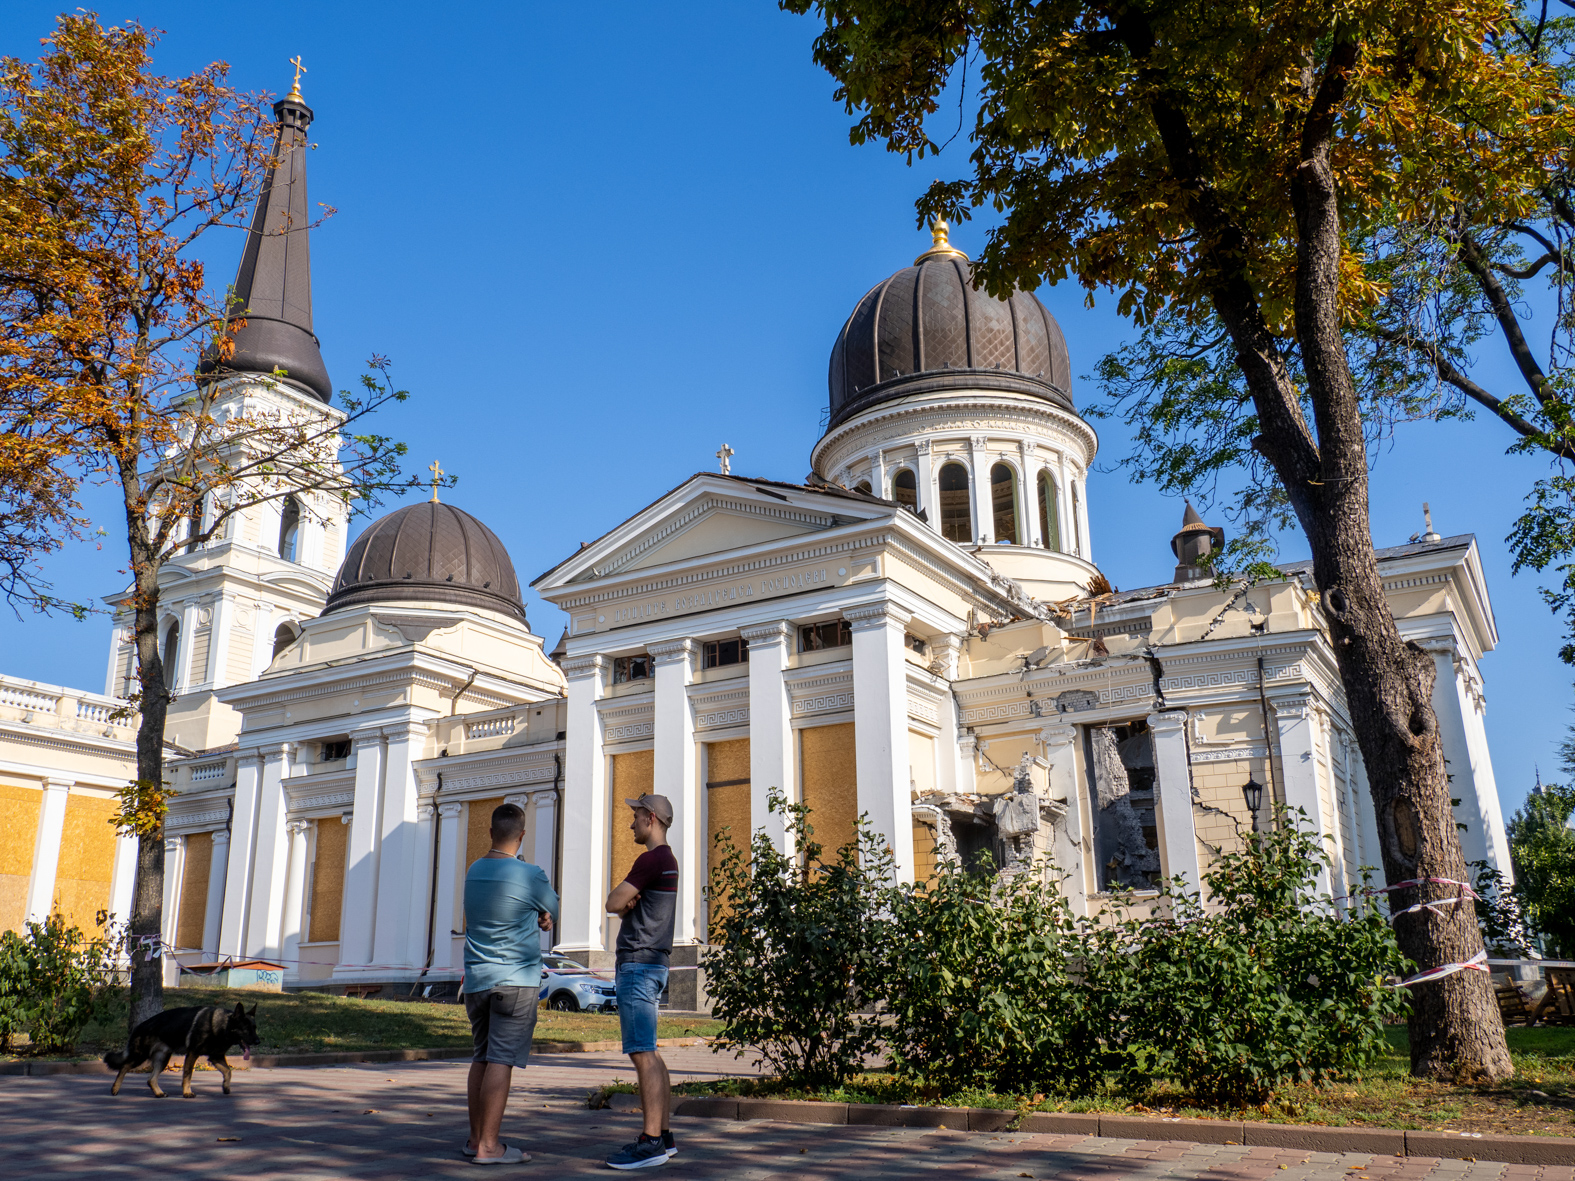 ODESSA, UKRAINE - AUGUST 27: Two men chat next to the Transfiguration Cathedral on August 27, 2023 in Odessa, Ukraine. In the early hours of July 23, a Russian missile strike, which killed one city resident and injured 20 others, reduced a large portion of the cathedral to rubble. (Photo by Peter Dench/Getty Images)